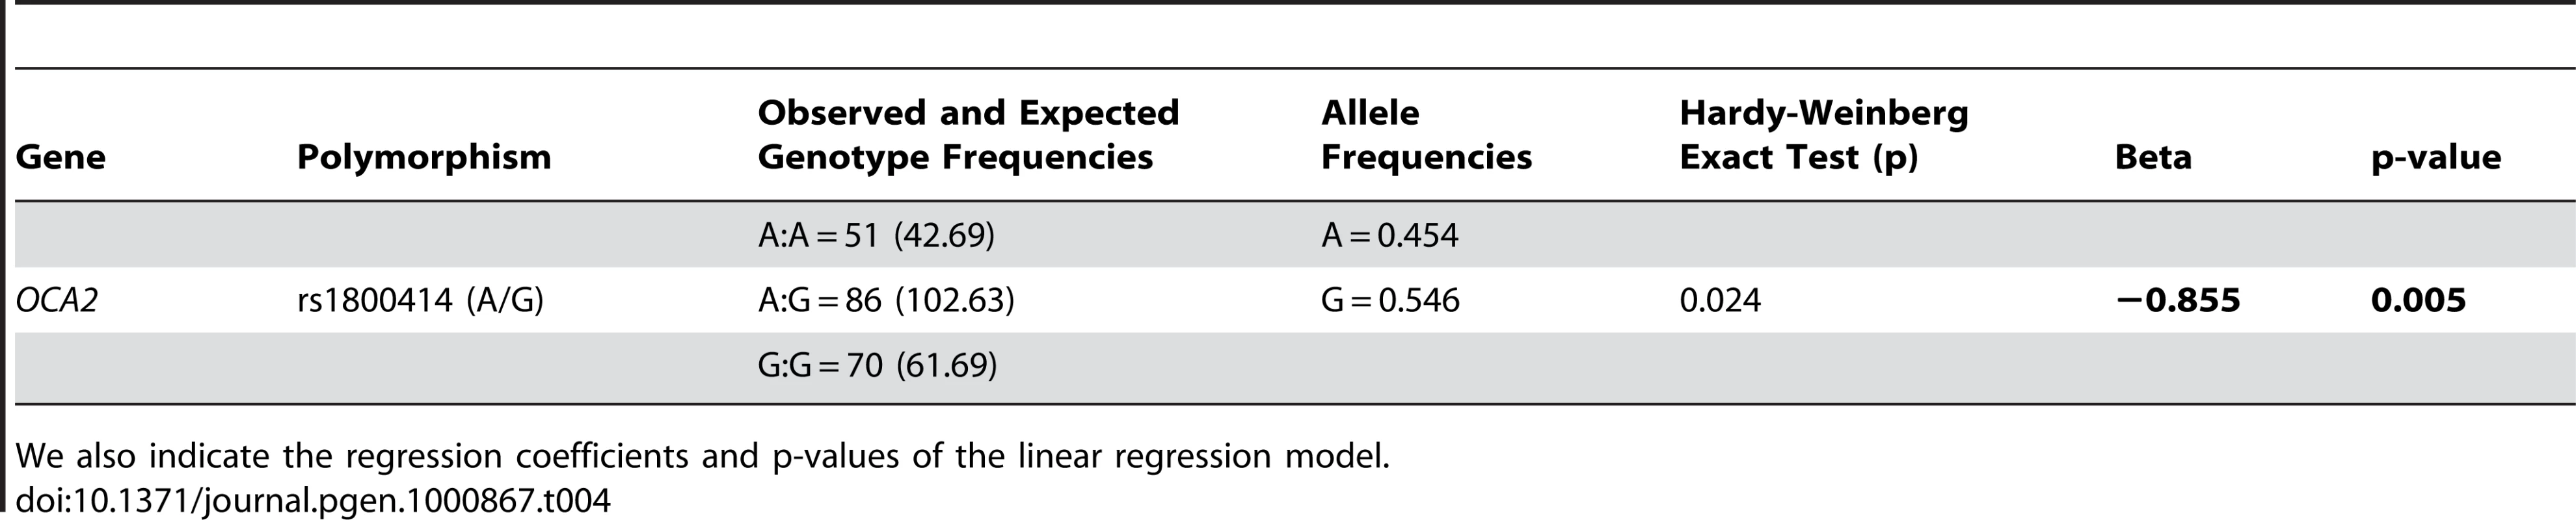 Observed and expected genotype frequencies, allele frequencies, and Hardy-Weinberg exact test for rs1800414 in the Chinese Han sample.